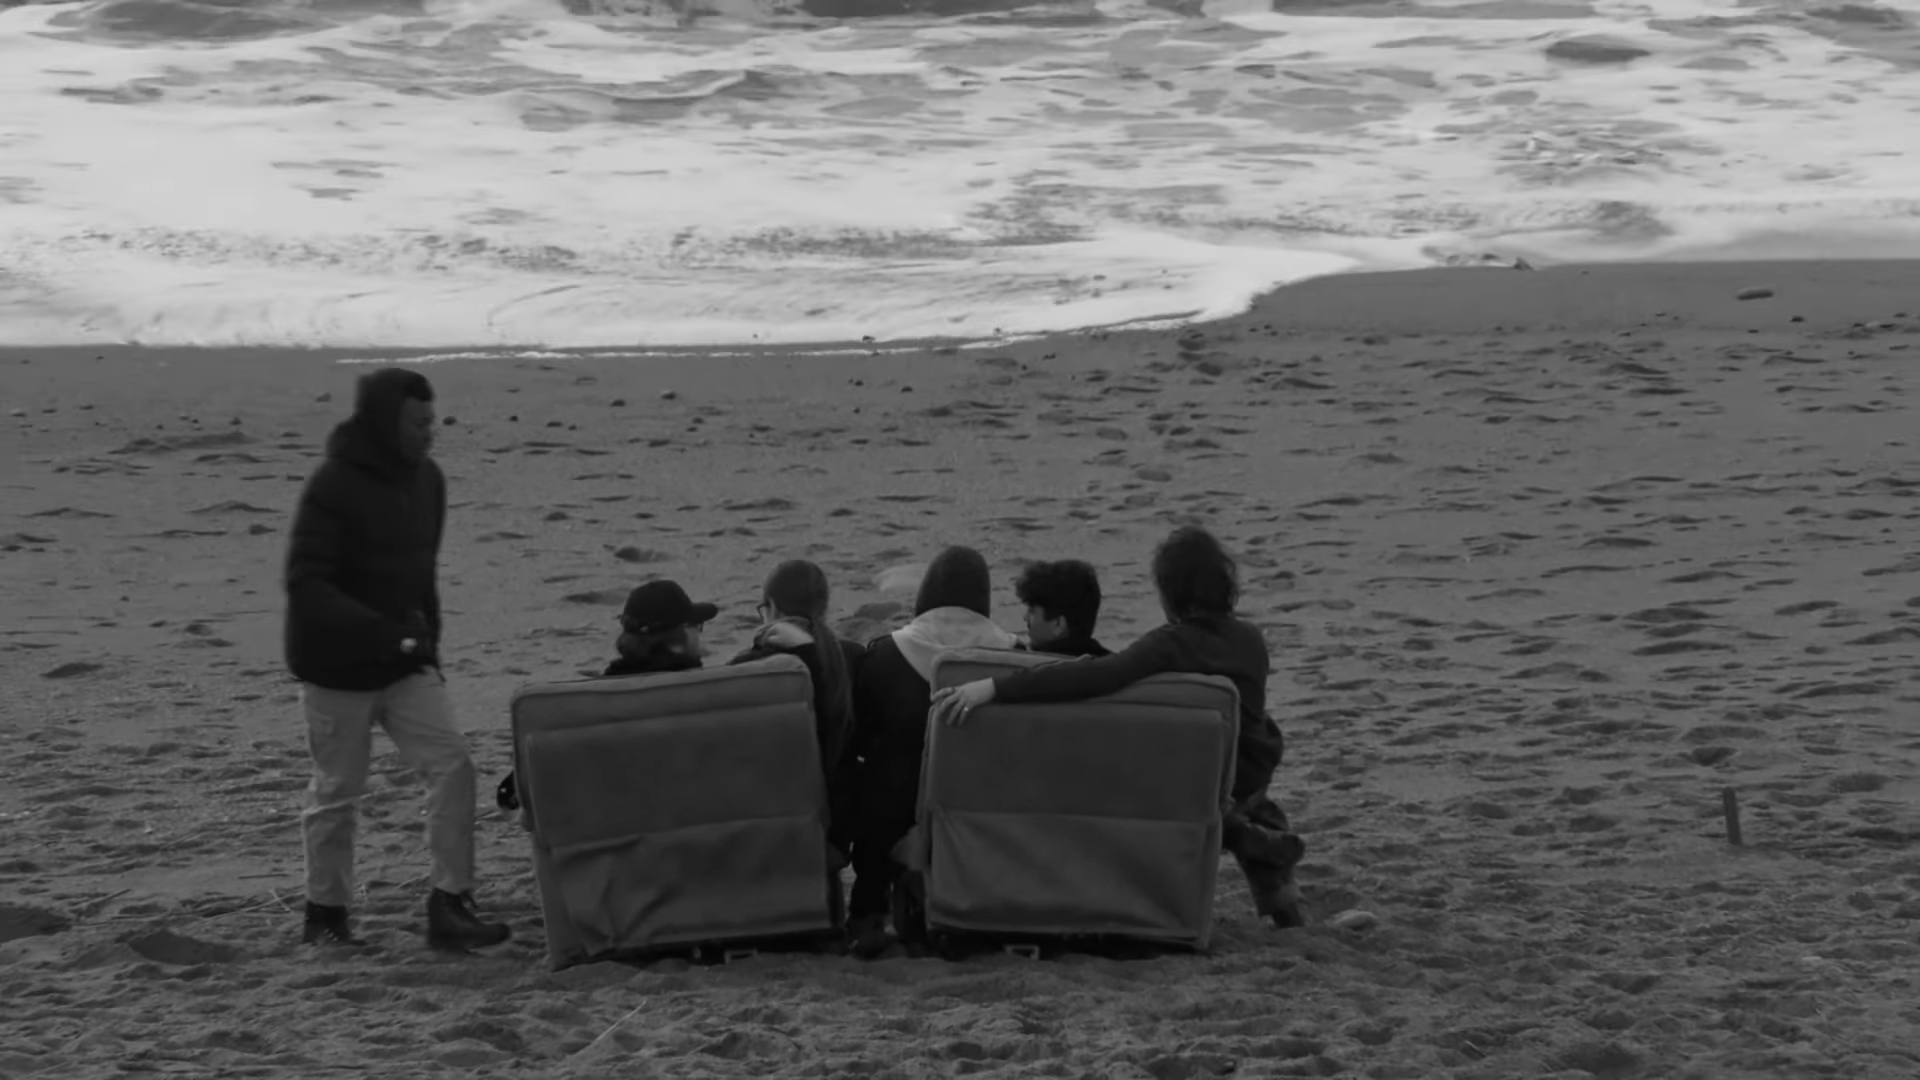 Black and white film still of group of people sitting on two lounge chairs on beach